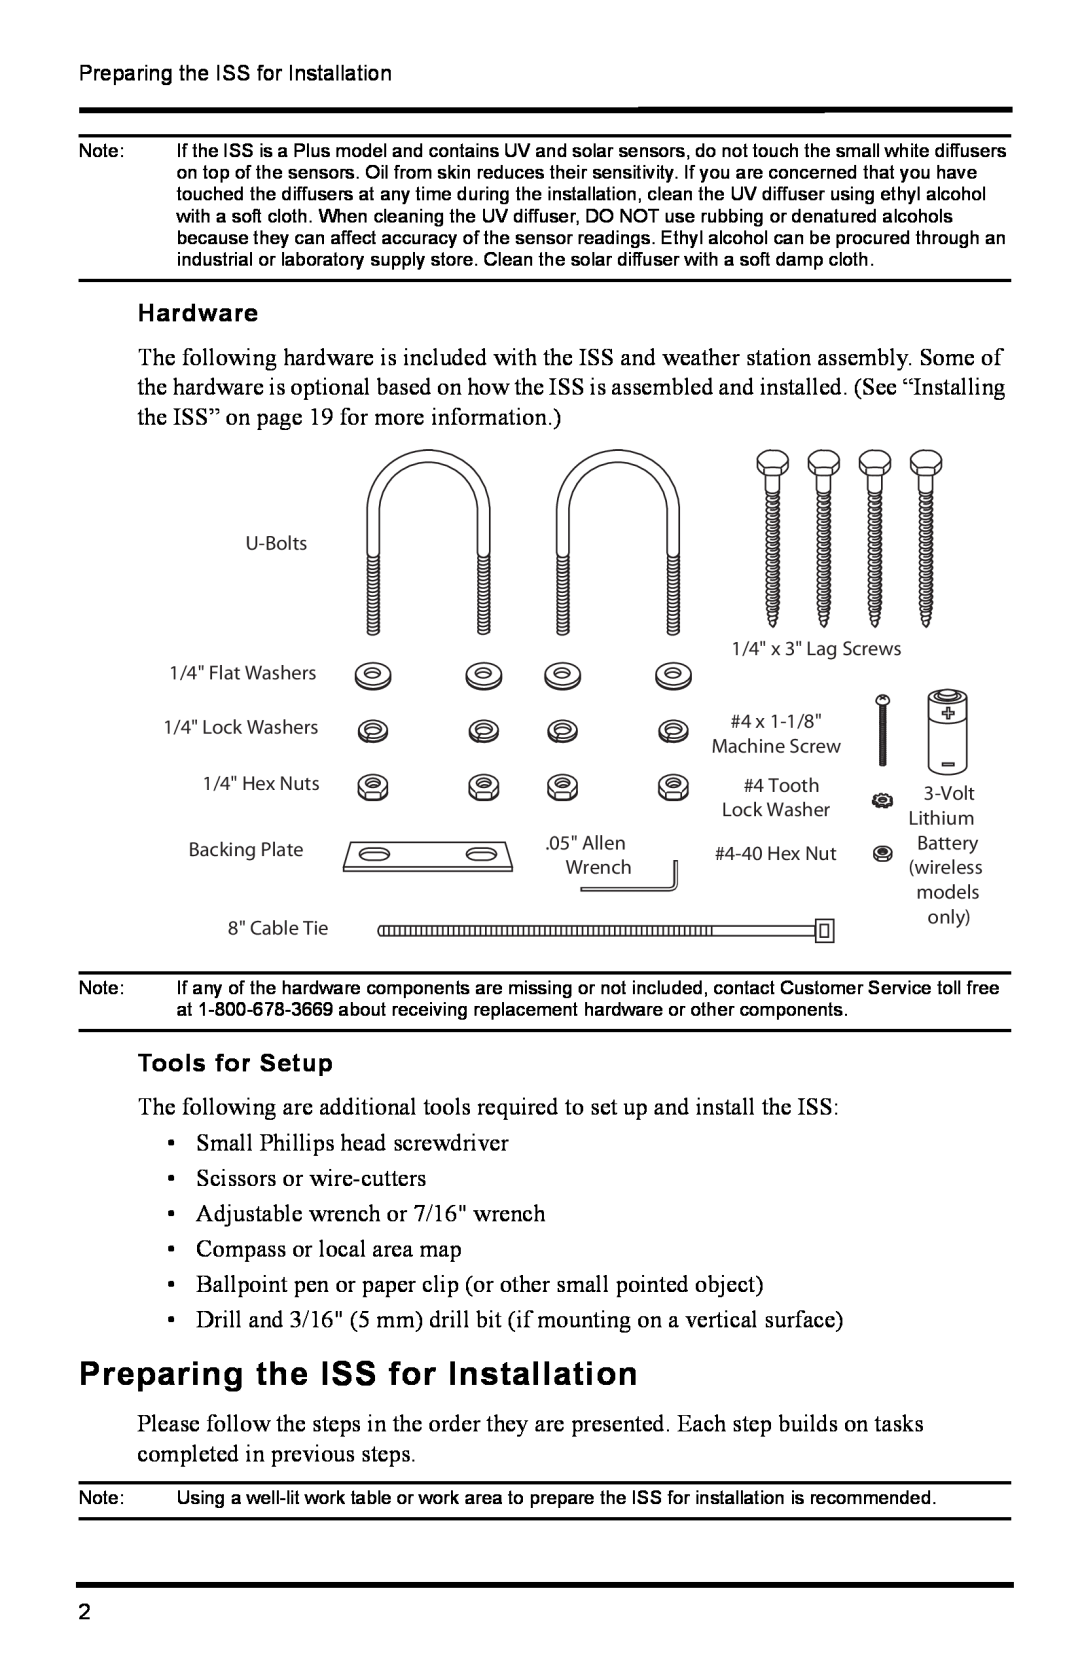 DAVIS 6322C installation manual Preparing the ISS for Installation, Hardware, Tools for Setup 